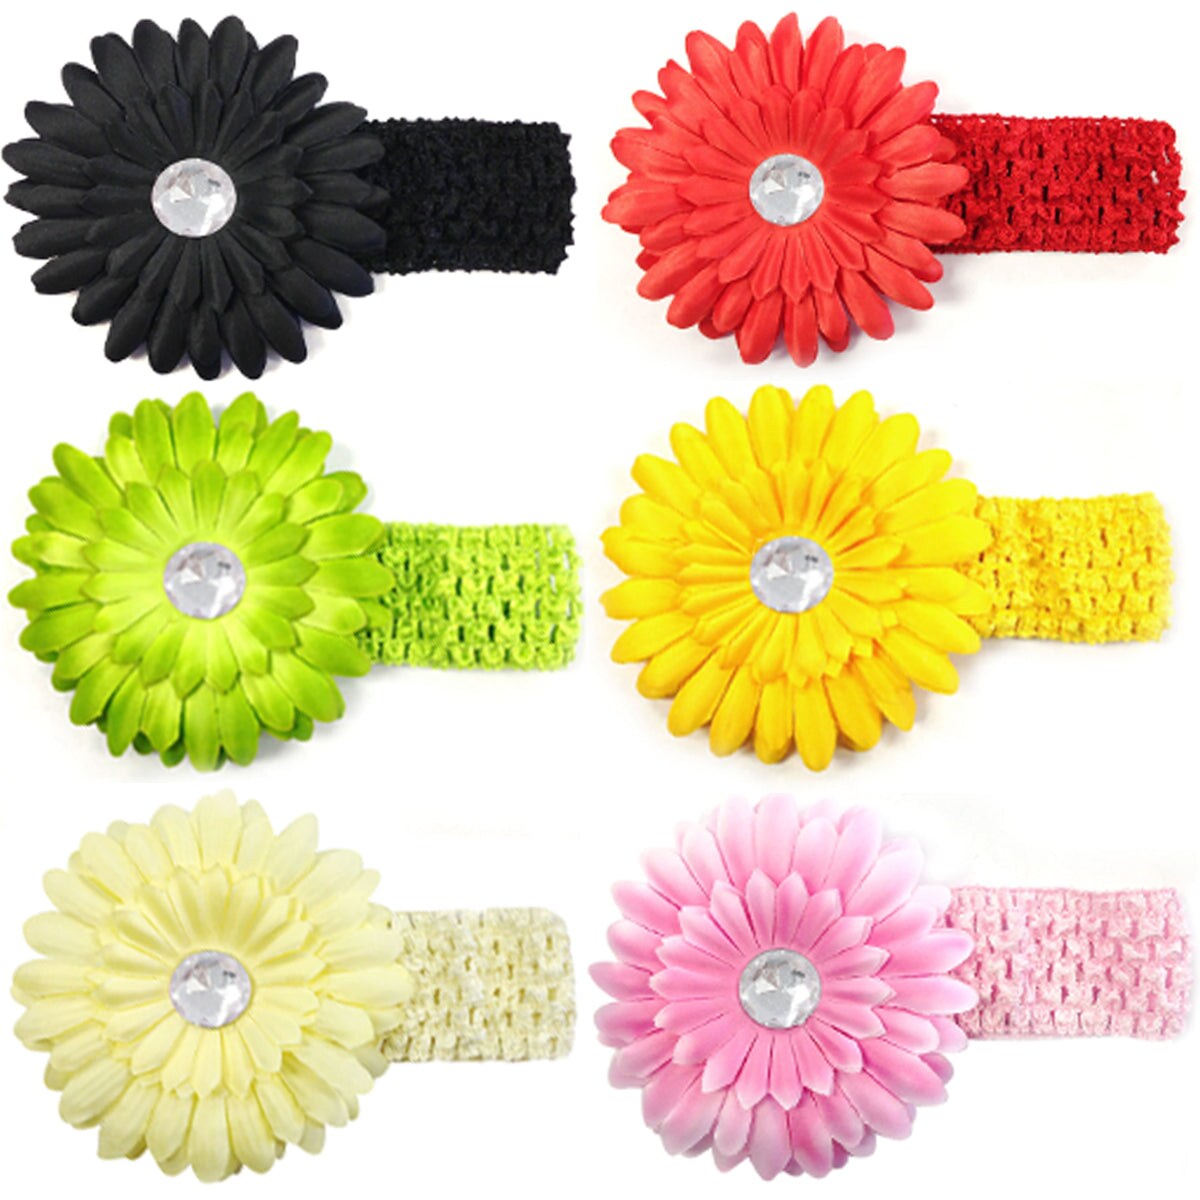 Wrapables Assorted Gerber Daisy Flower Hair Clips With Soft Stretchy Crochet Baby Headbands (24 Pack, 12 Flowers + 12 Headbands)